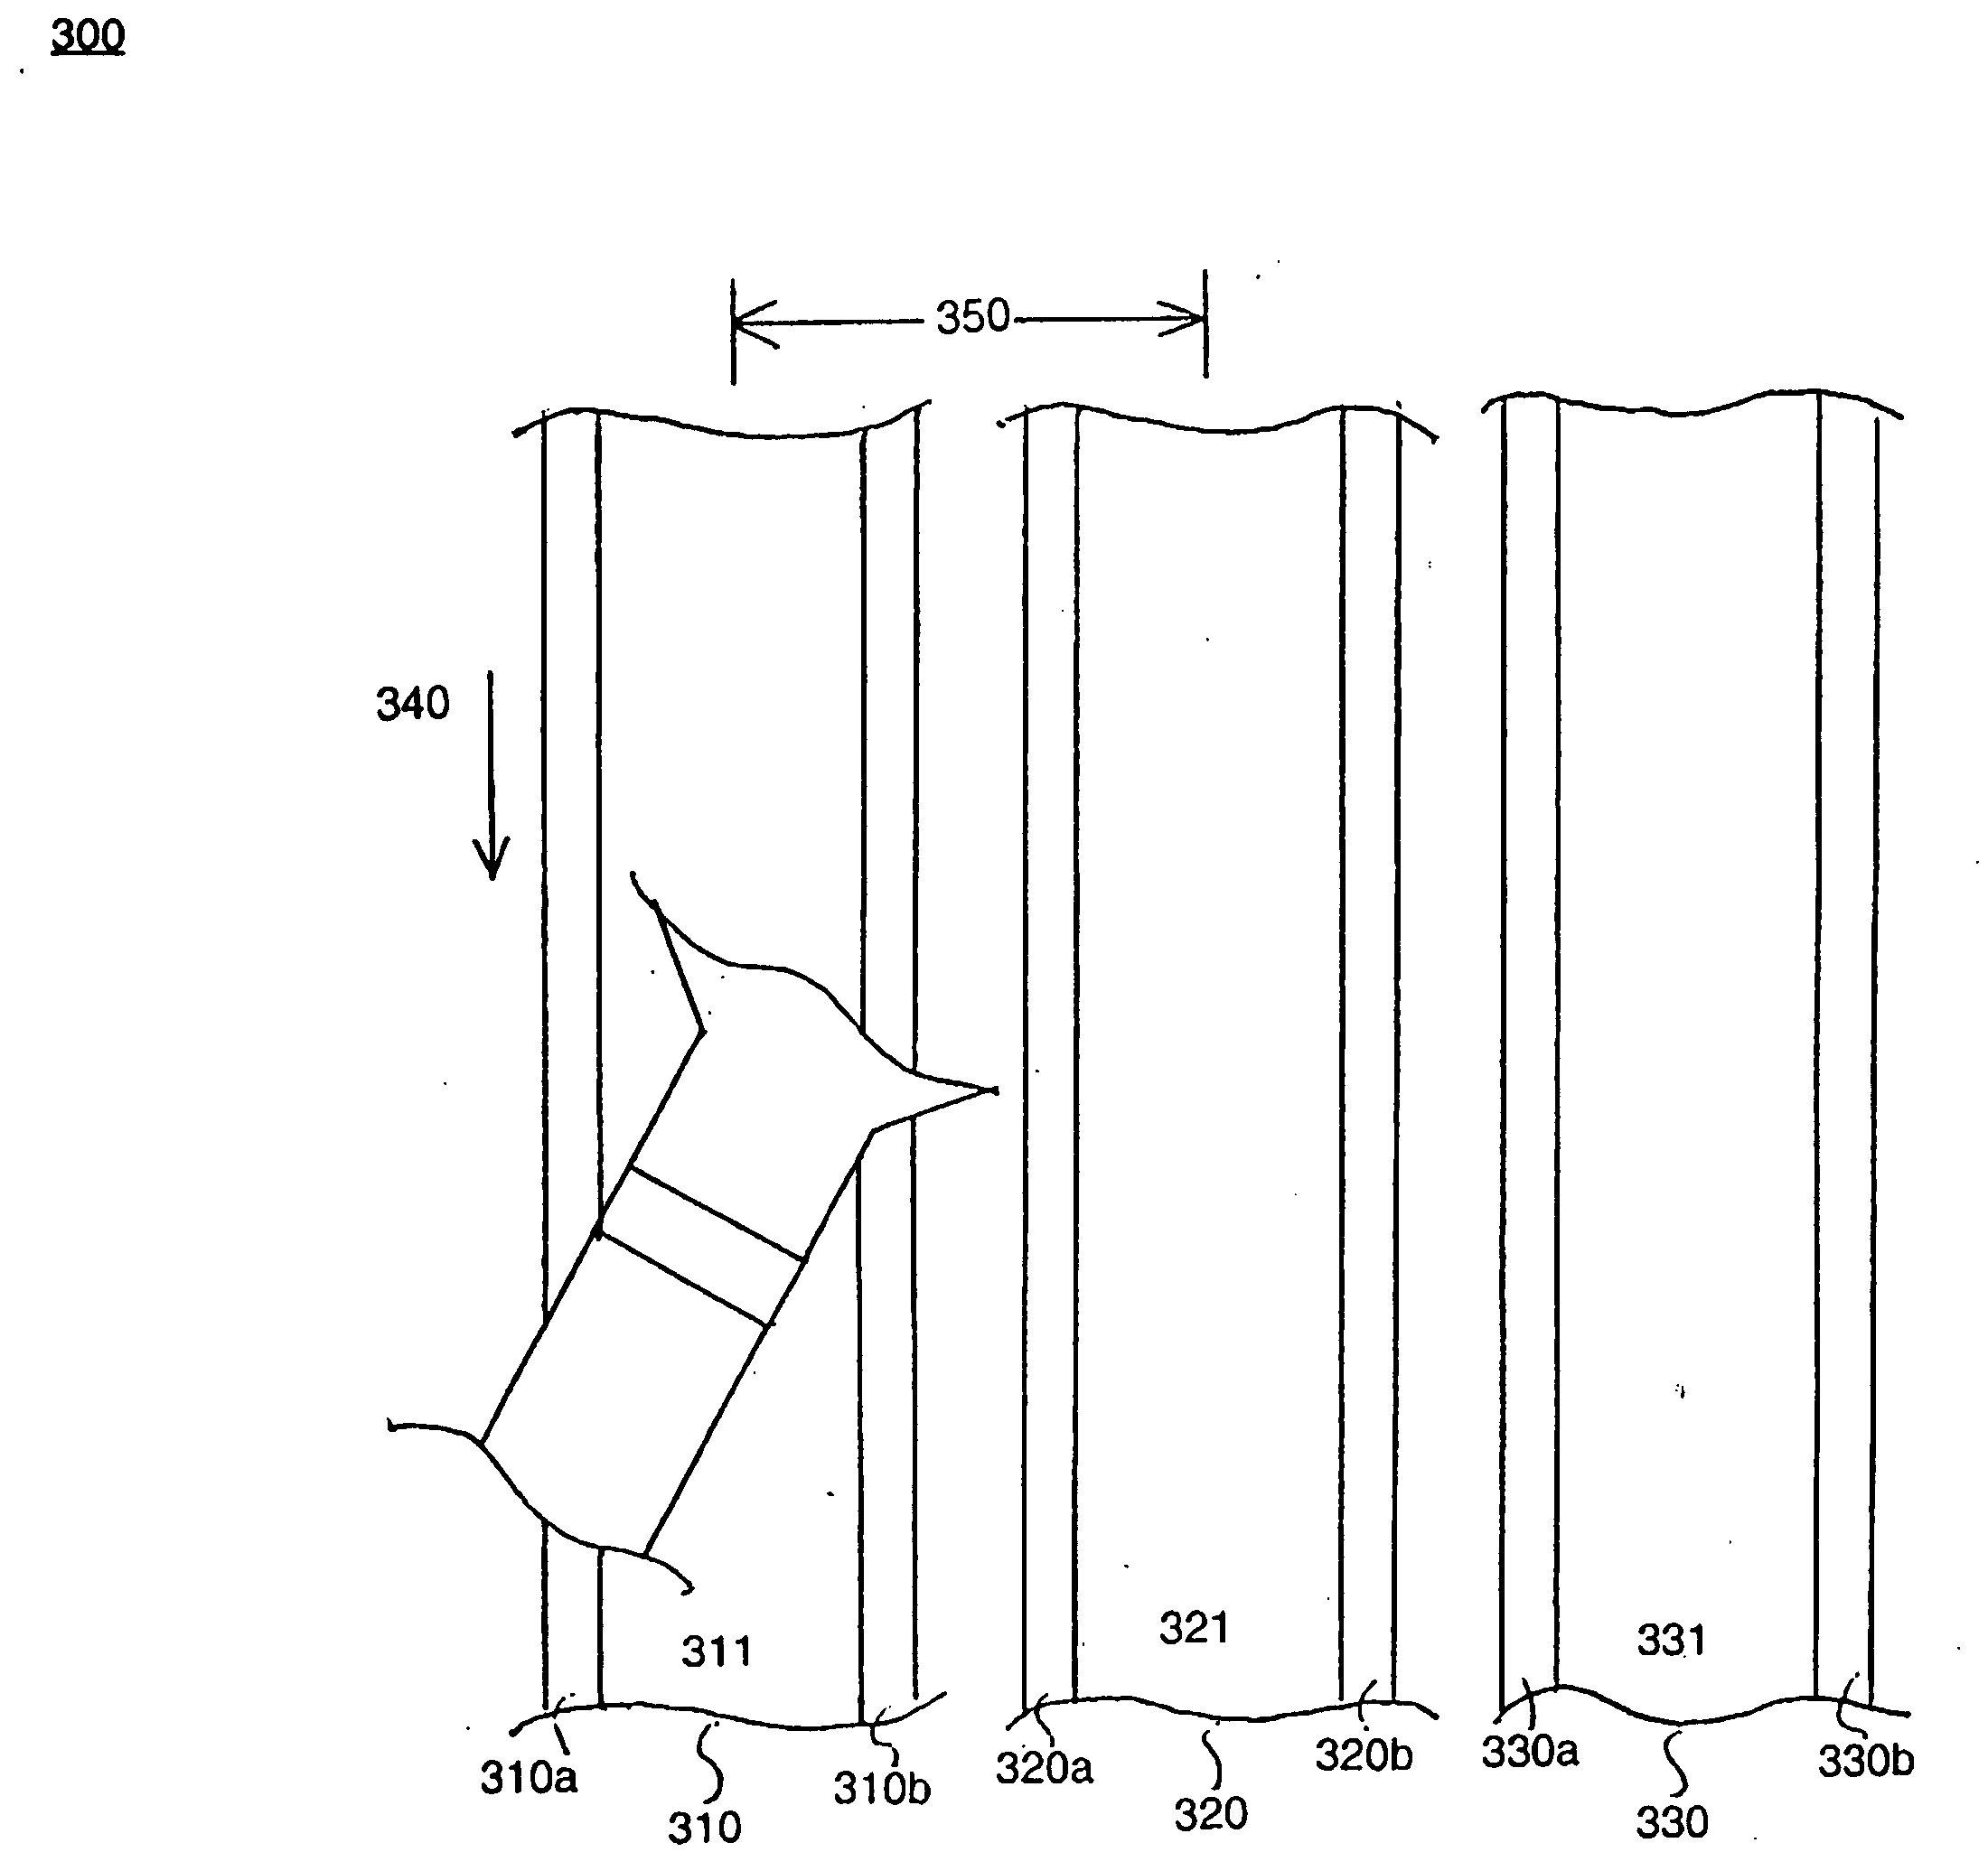 Process for fabricating a magnetic recording head with a laminated write gap